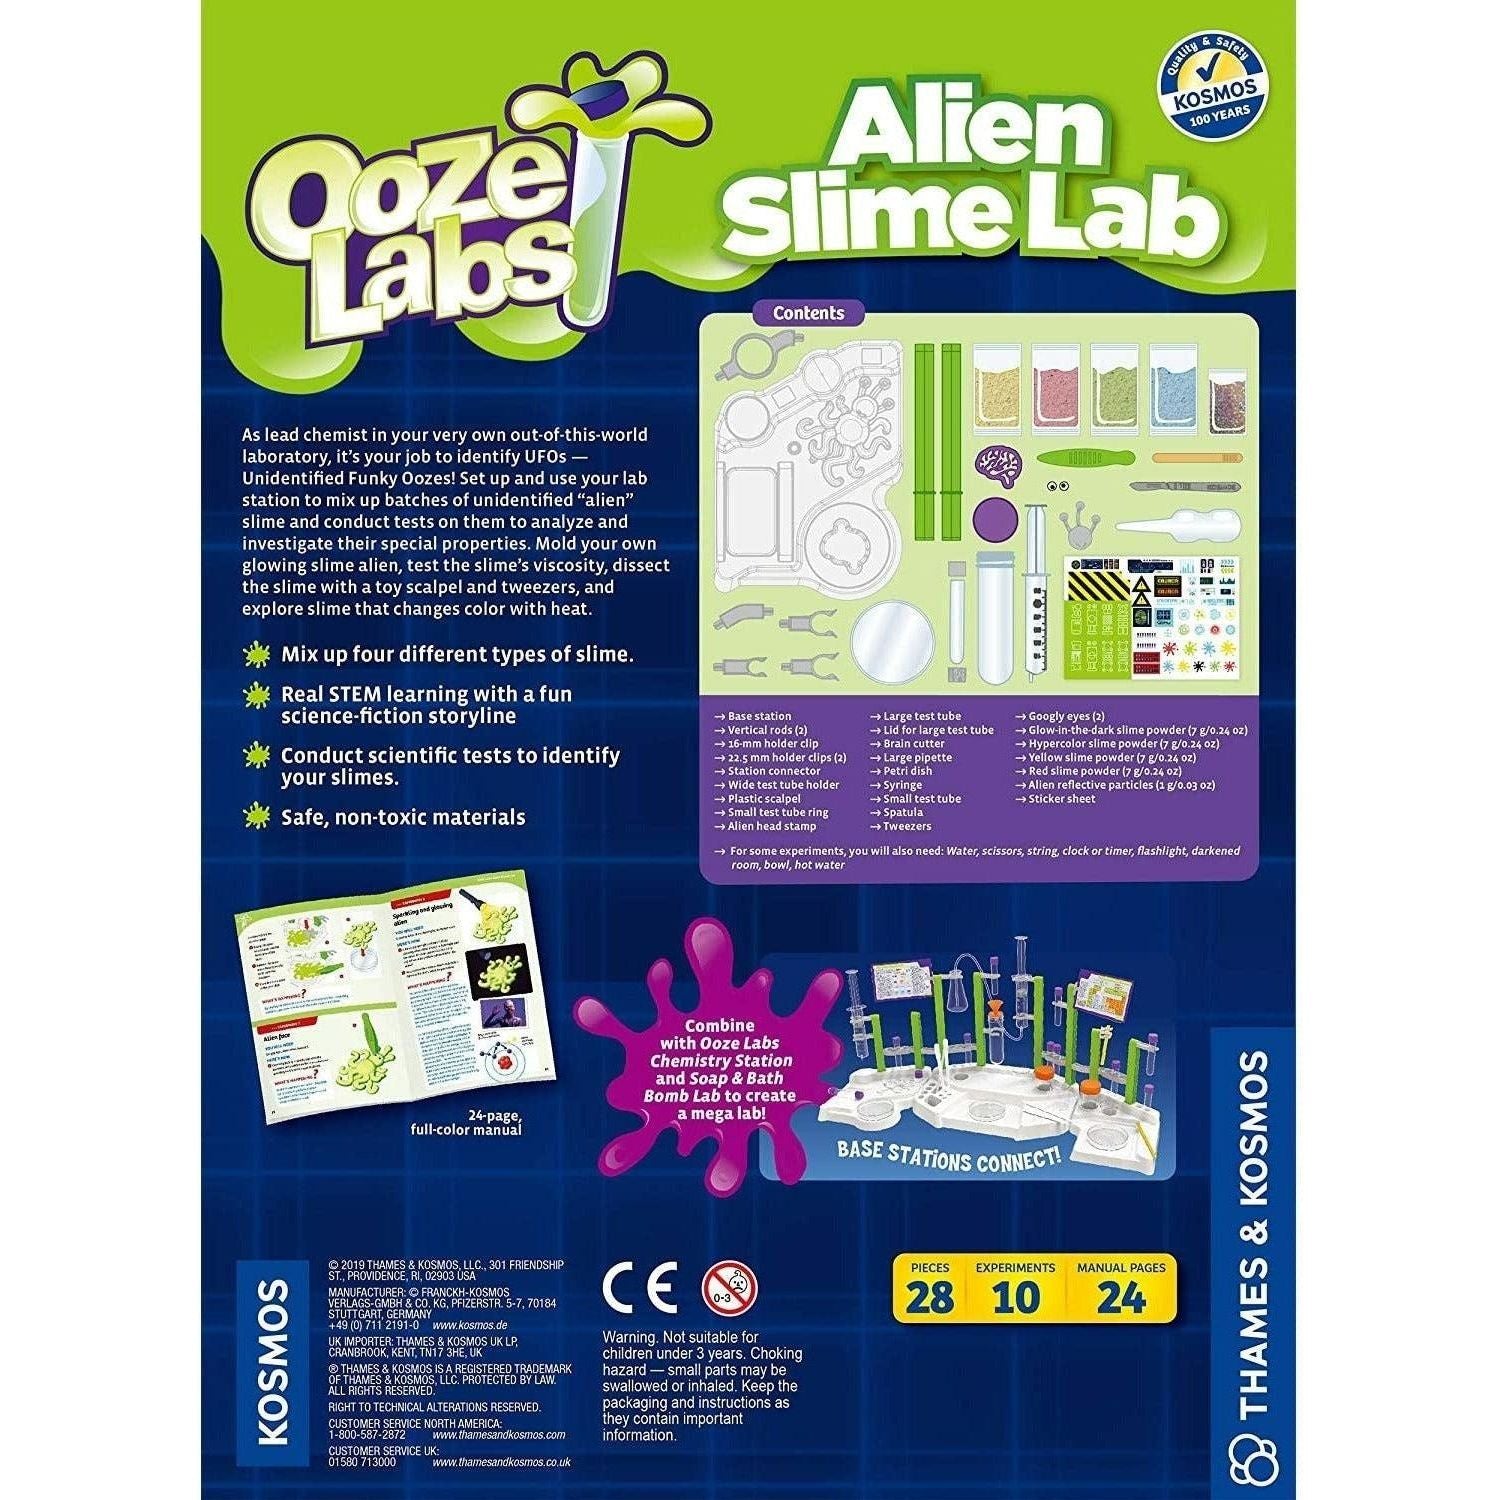 Thames & Kosmos Ooze Labs: Alien Slime Lab Science Experiment Kit & Lab Setup, 10 Experiments with Slime - BumbleToys - 6+ Years, Boys, Girls, Science, Slime & Putty Toys